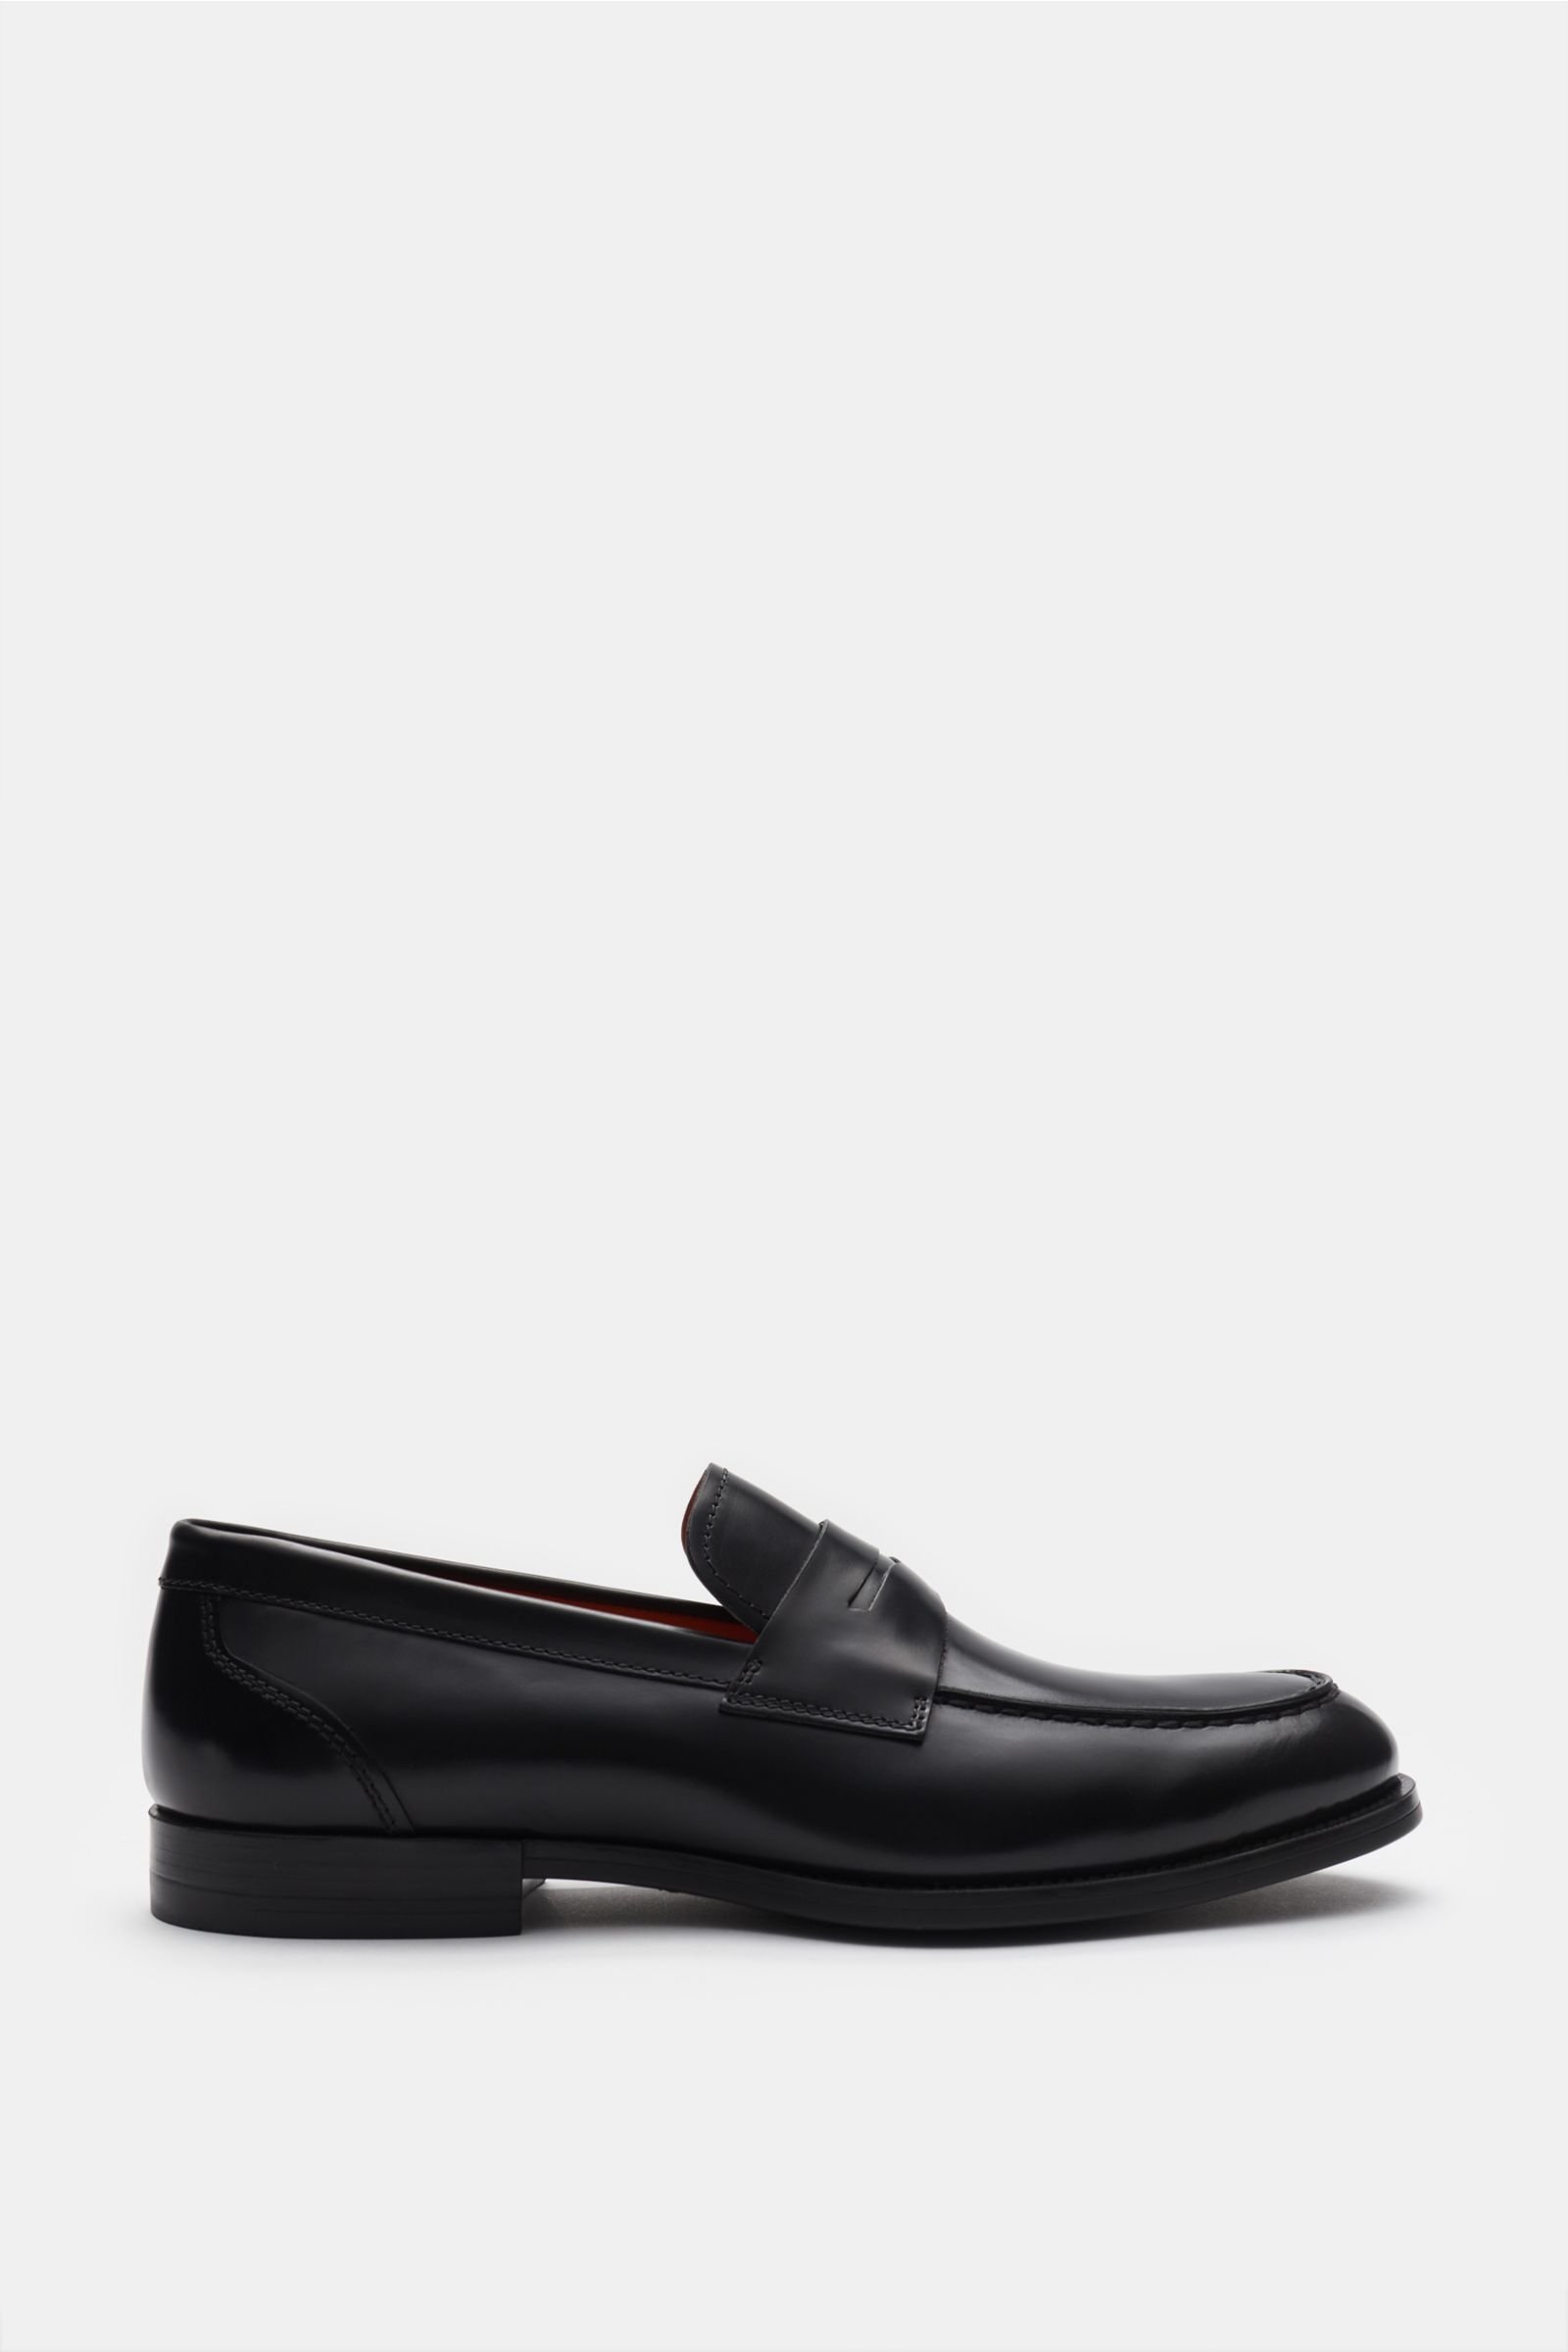 Penny loafers black